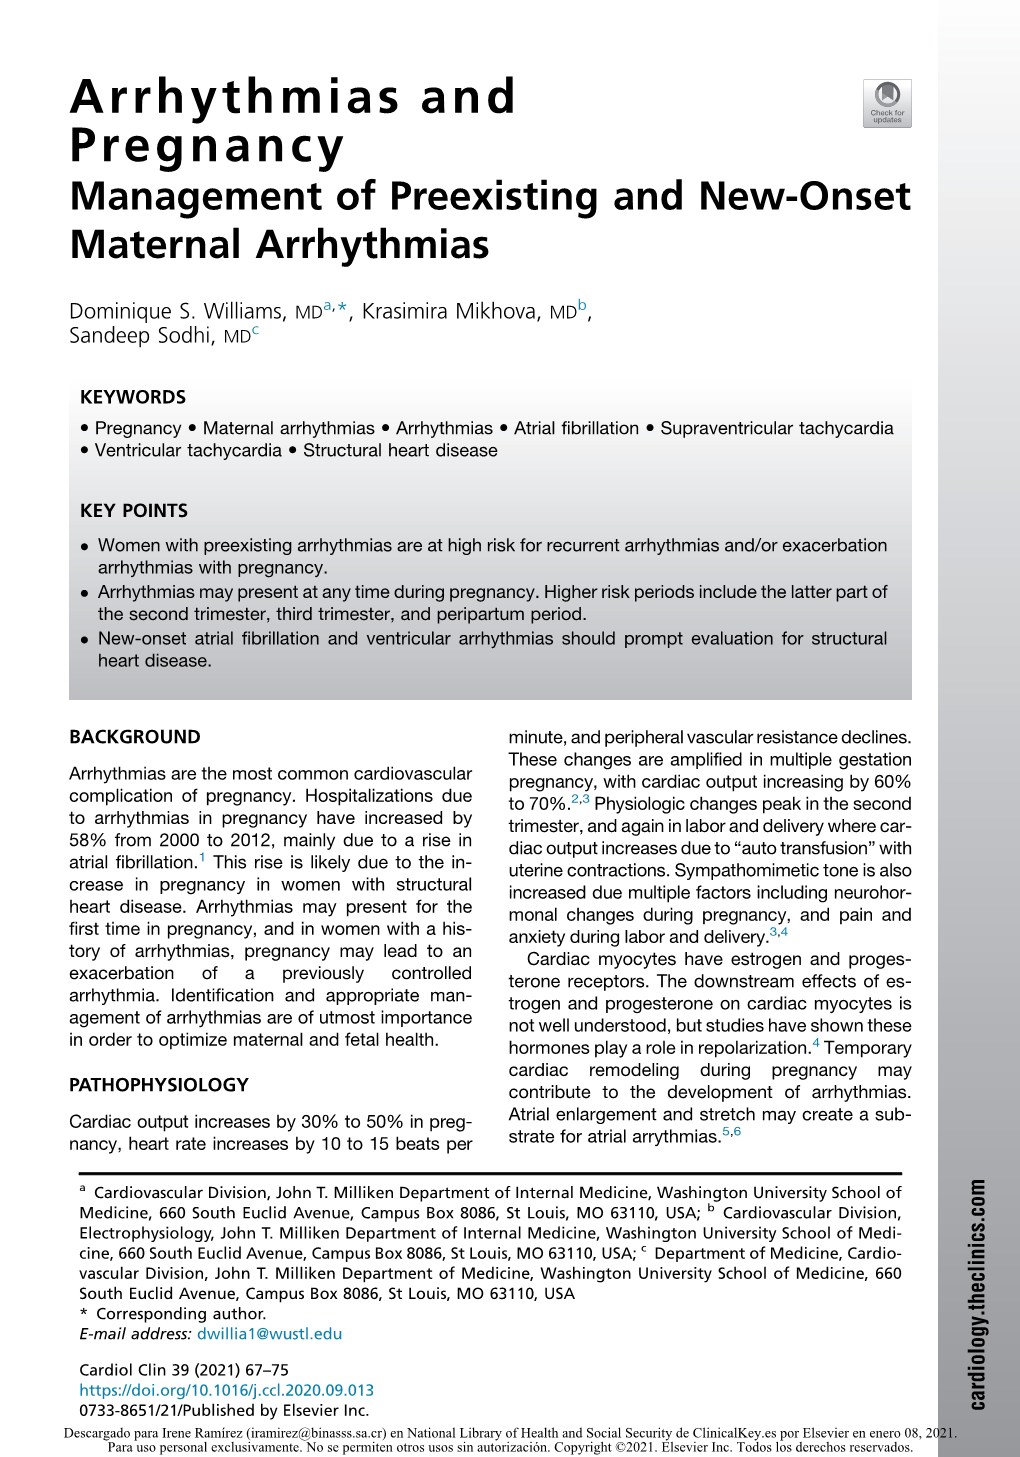 Arrhythmias and Pregnancy Management of Preexisting and New-Onset Maternal Arrhythmias